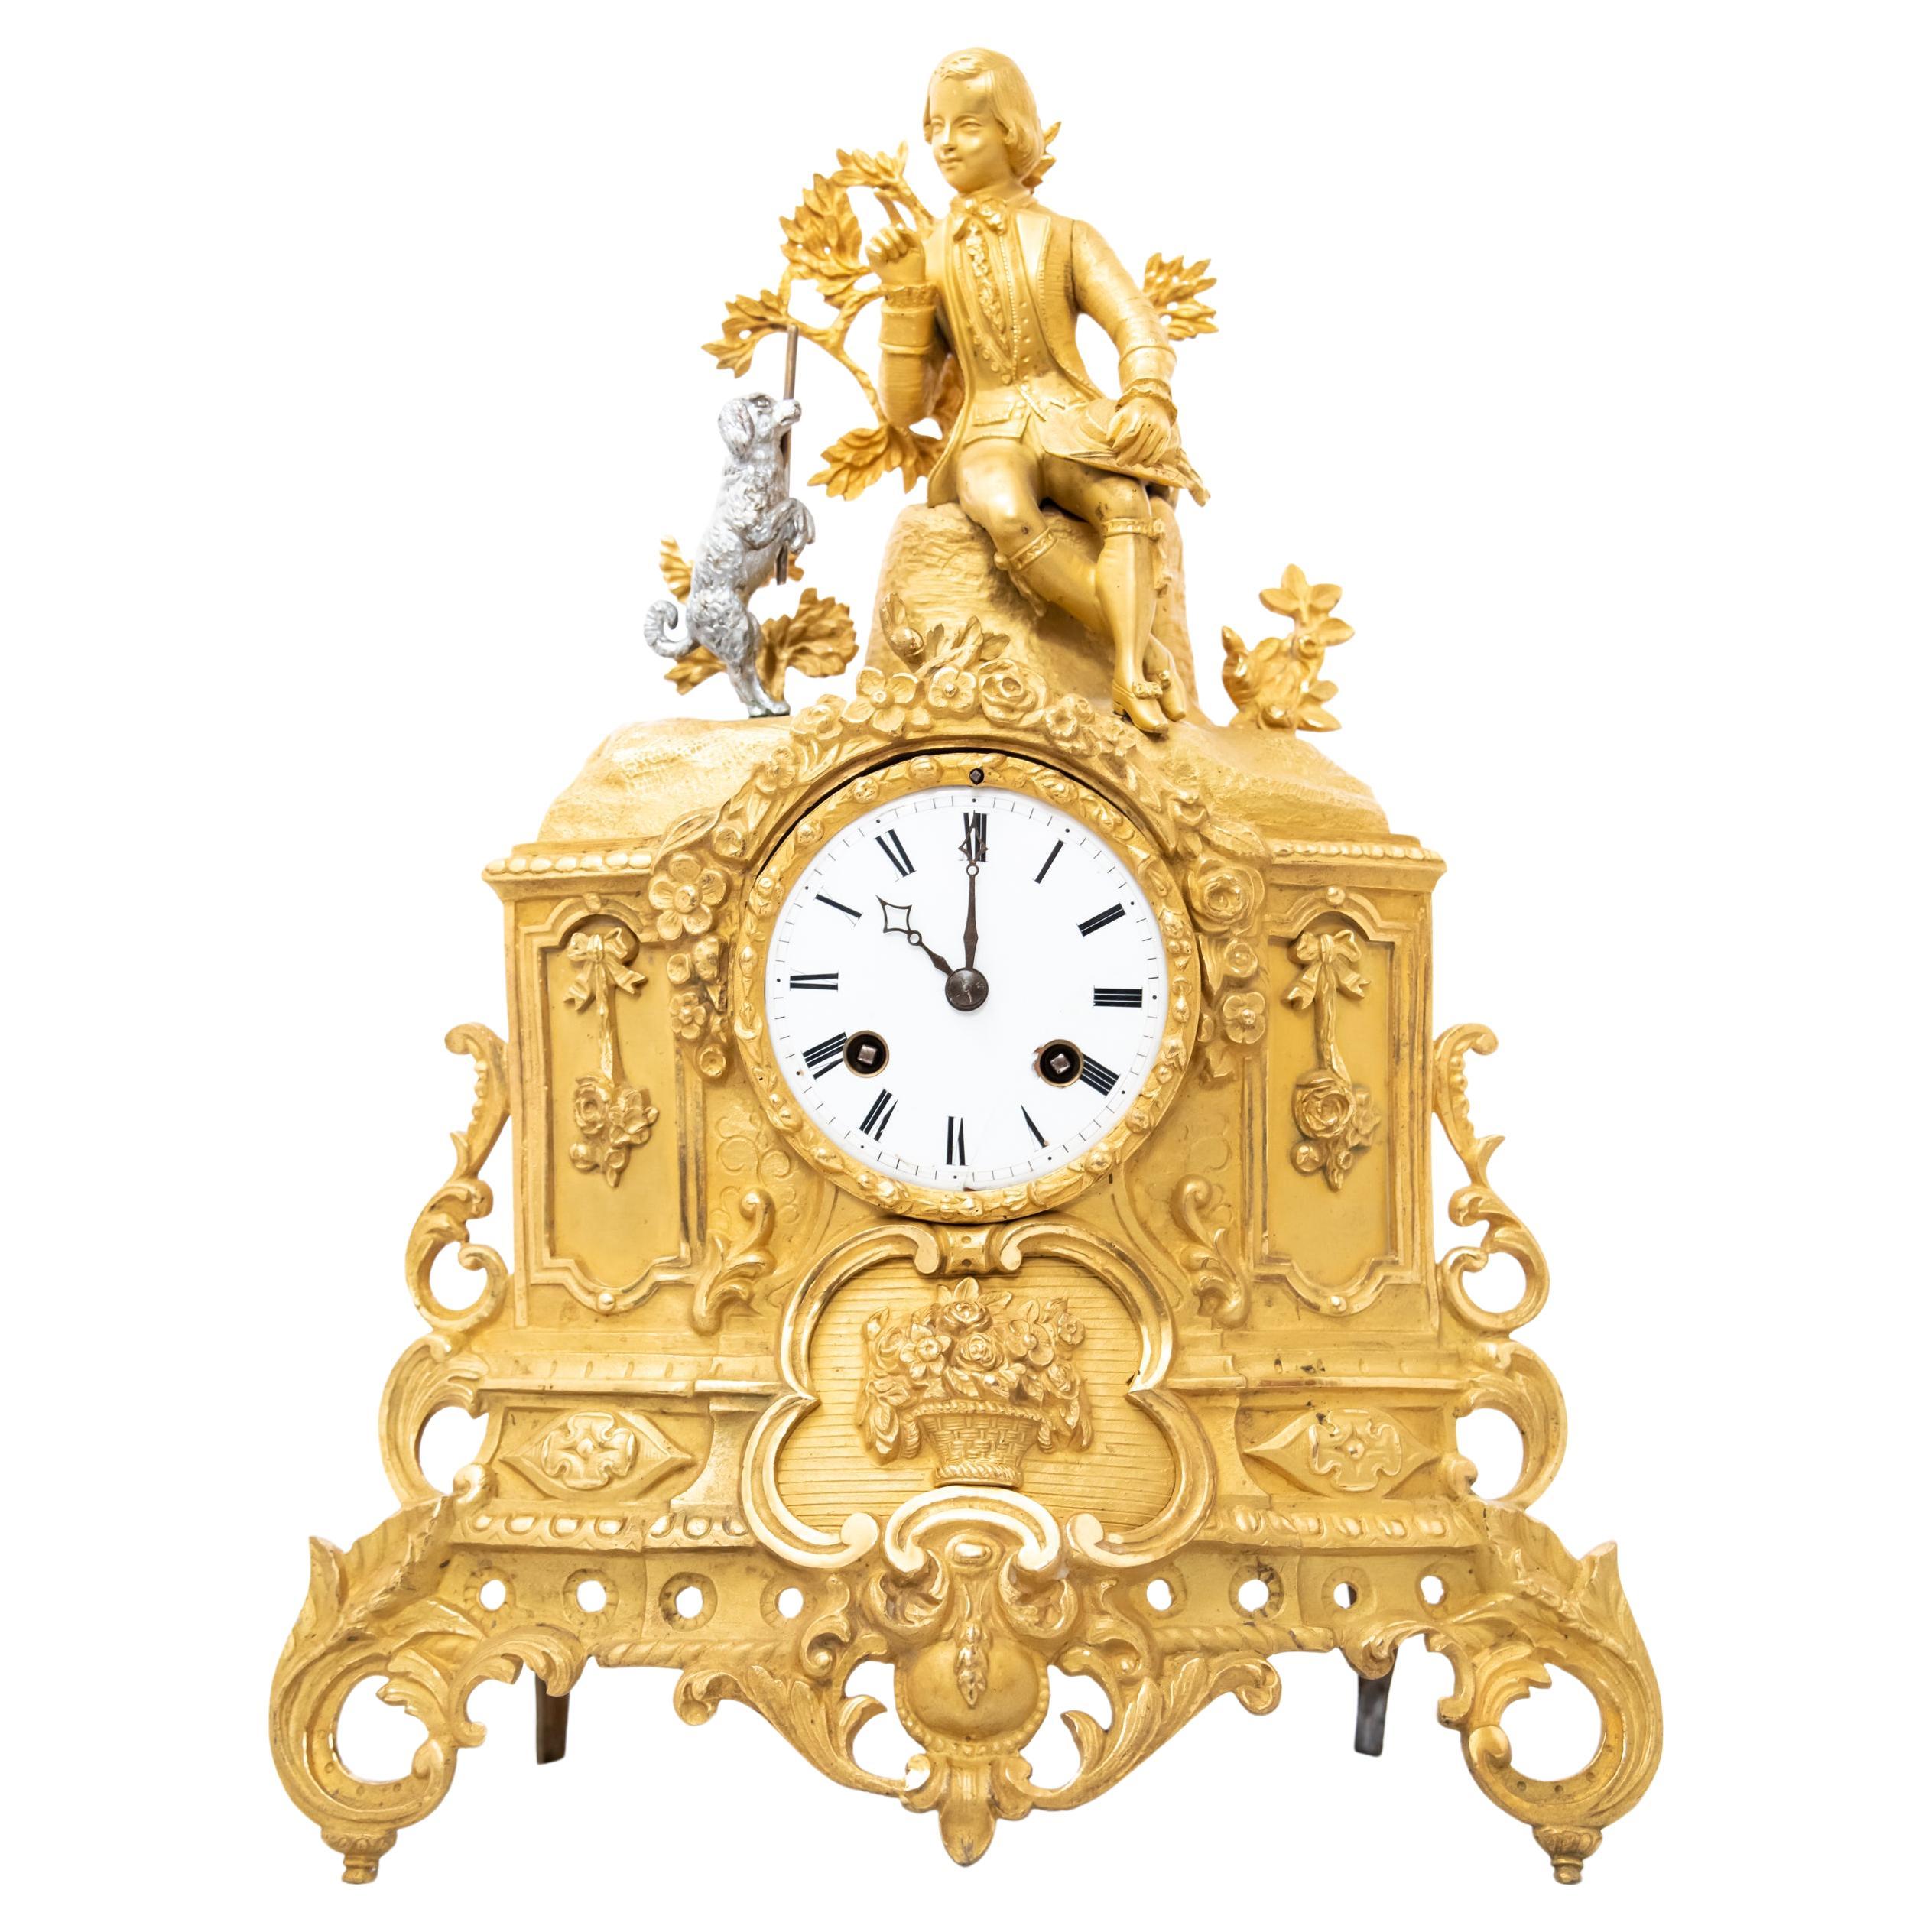 A Boy and His Dog, 19th Century French Fire-Gilt Bronze Clock